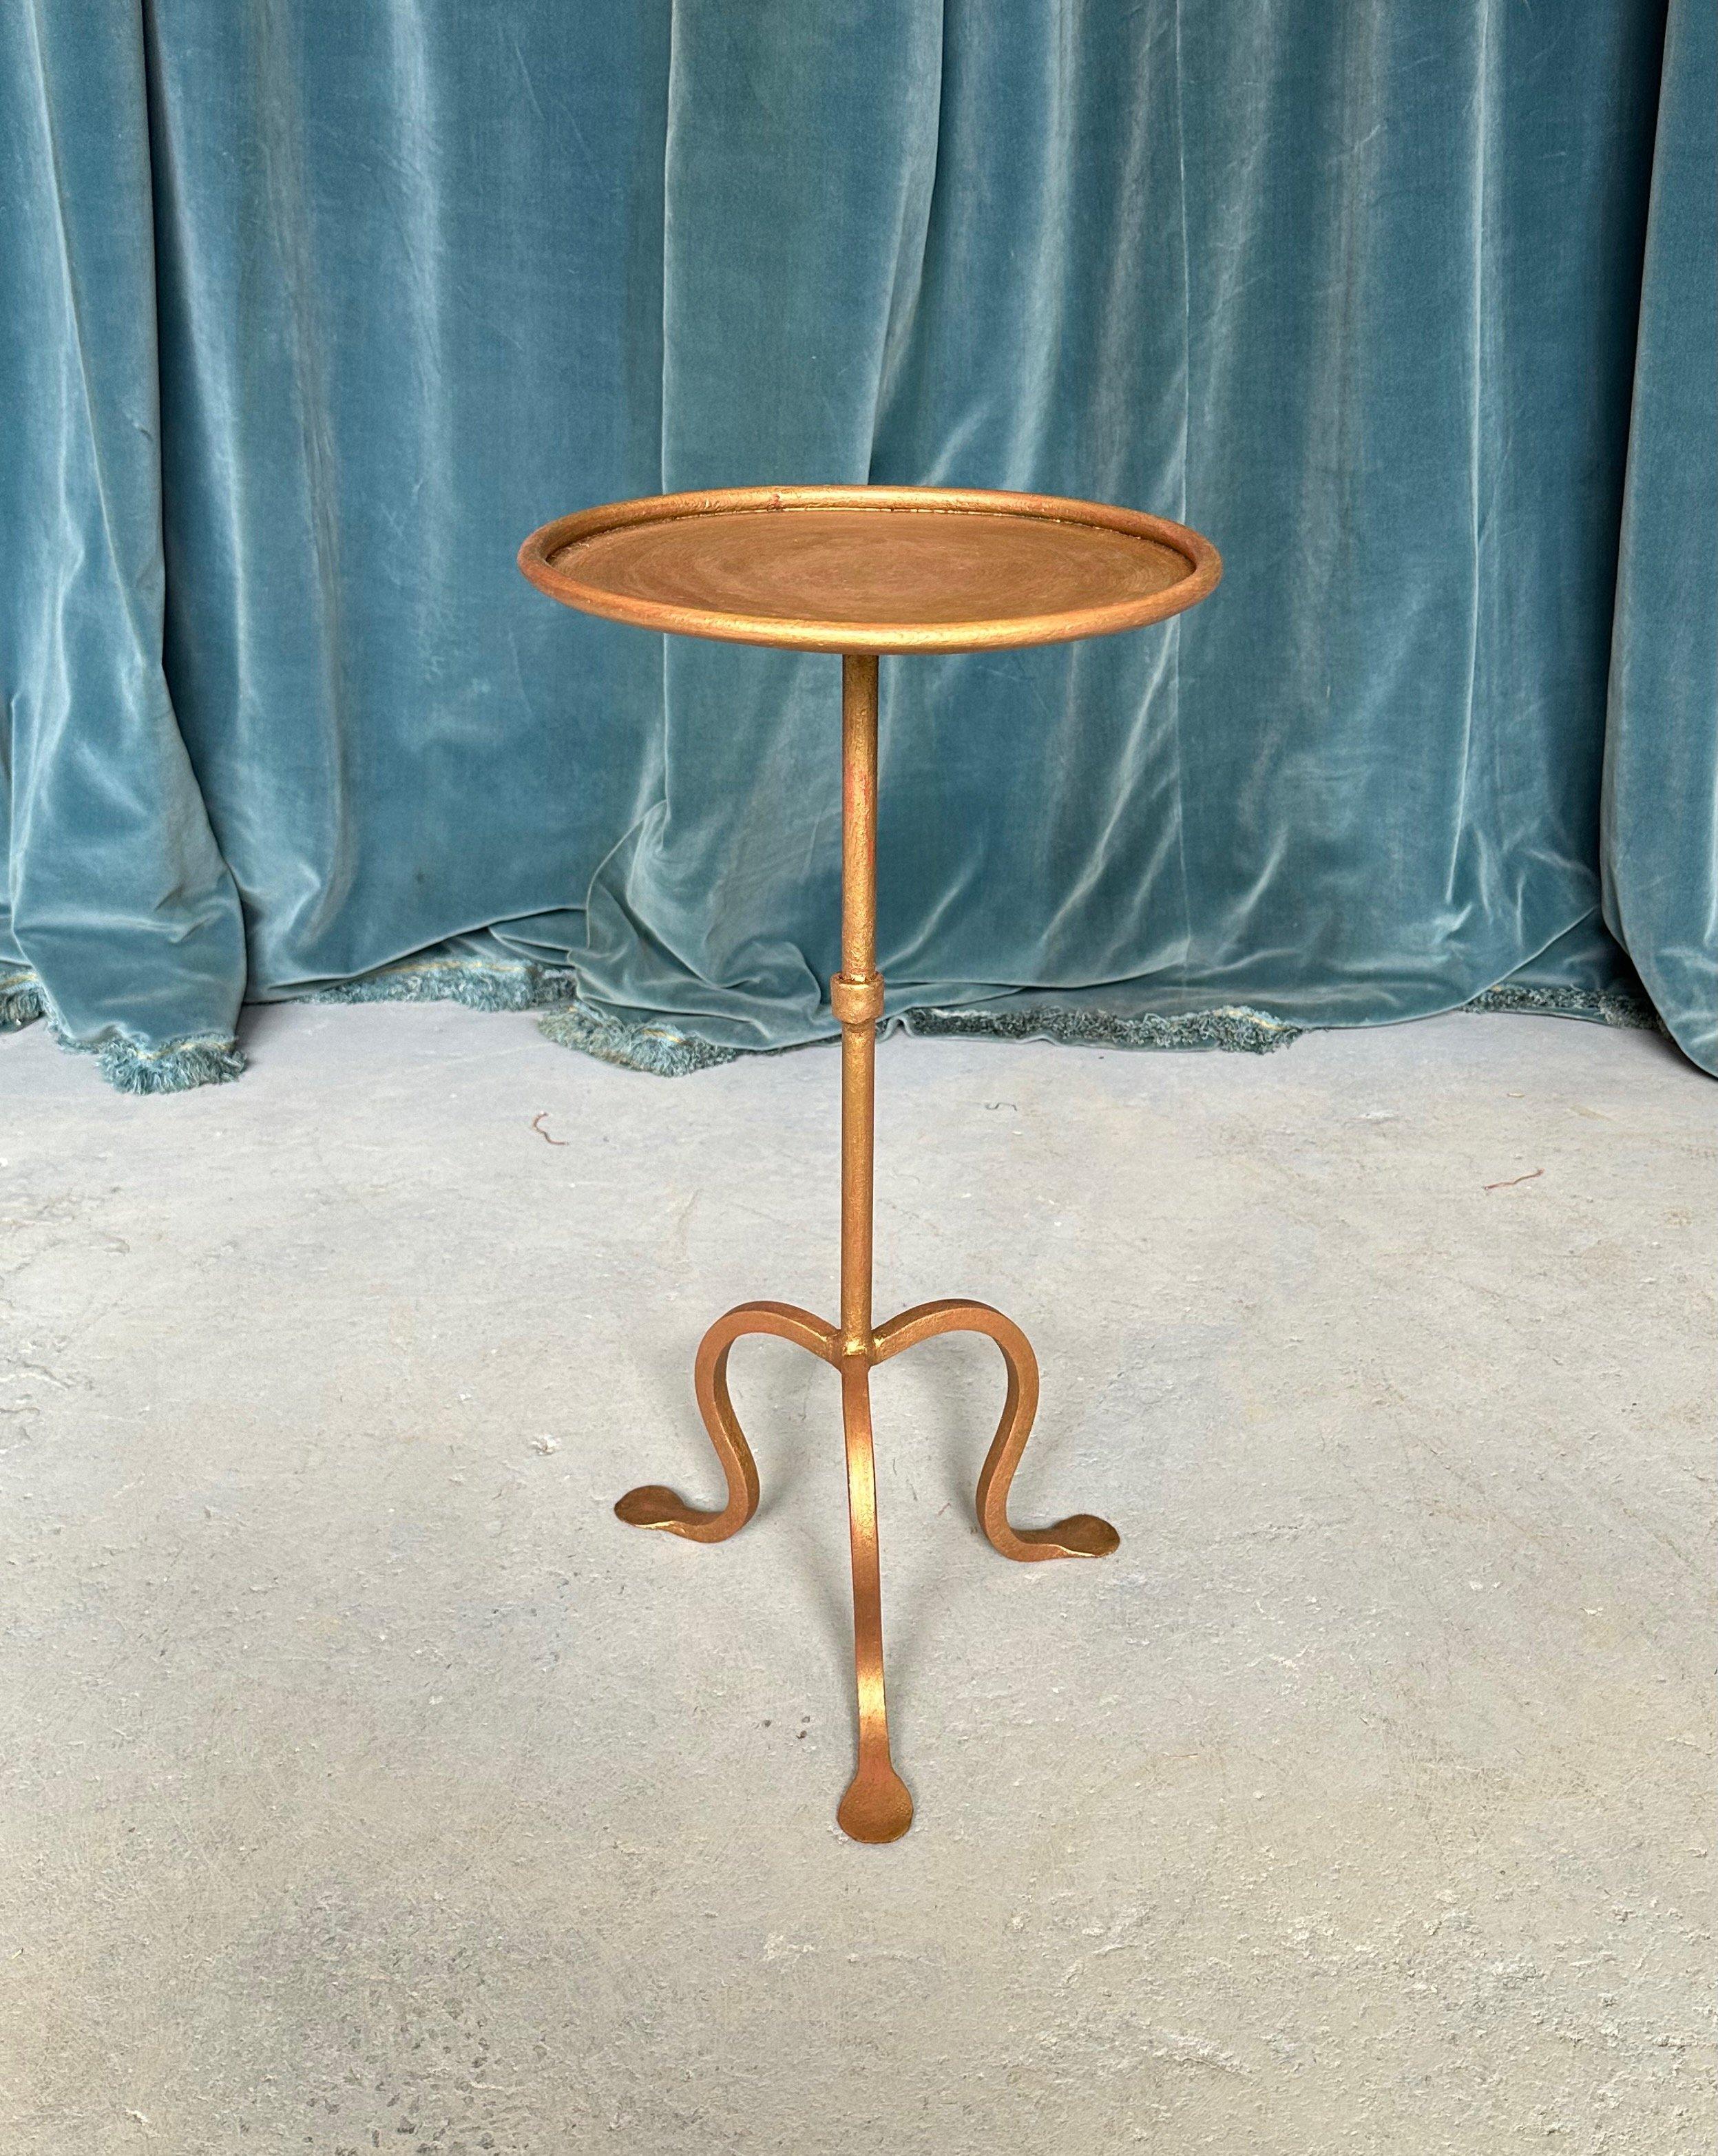 Based on one of our favorite vintage designs, this lovely Spanish iron drinks table was recently crafted to our specifications and features a hand-applied gilt gold finish with red undertones. The stem has a central ring detail and is mounted on a